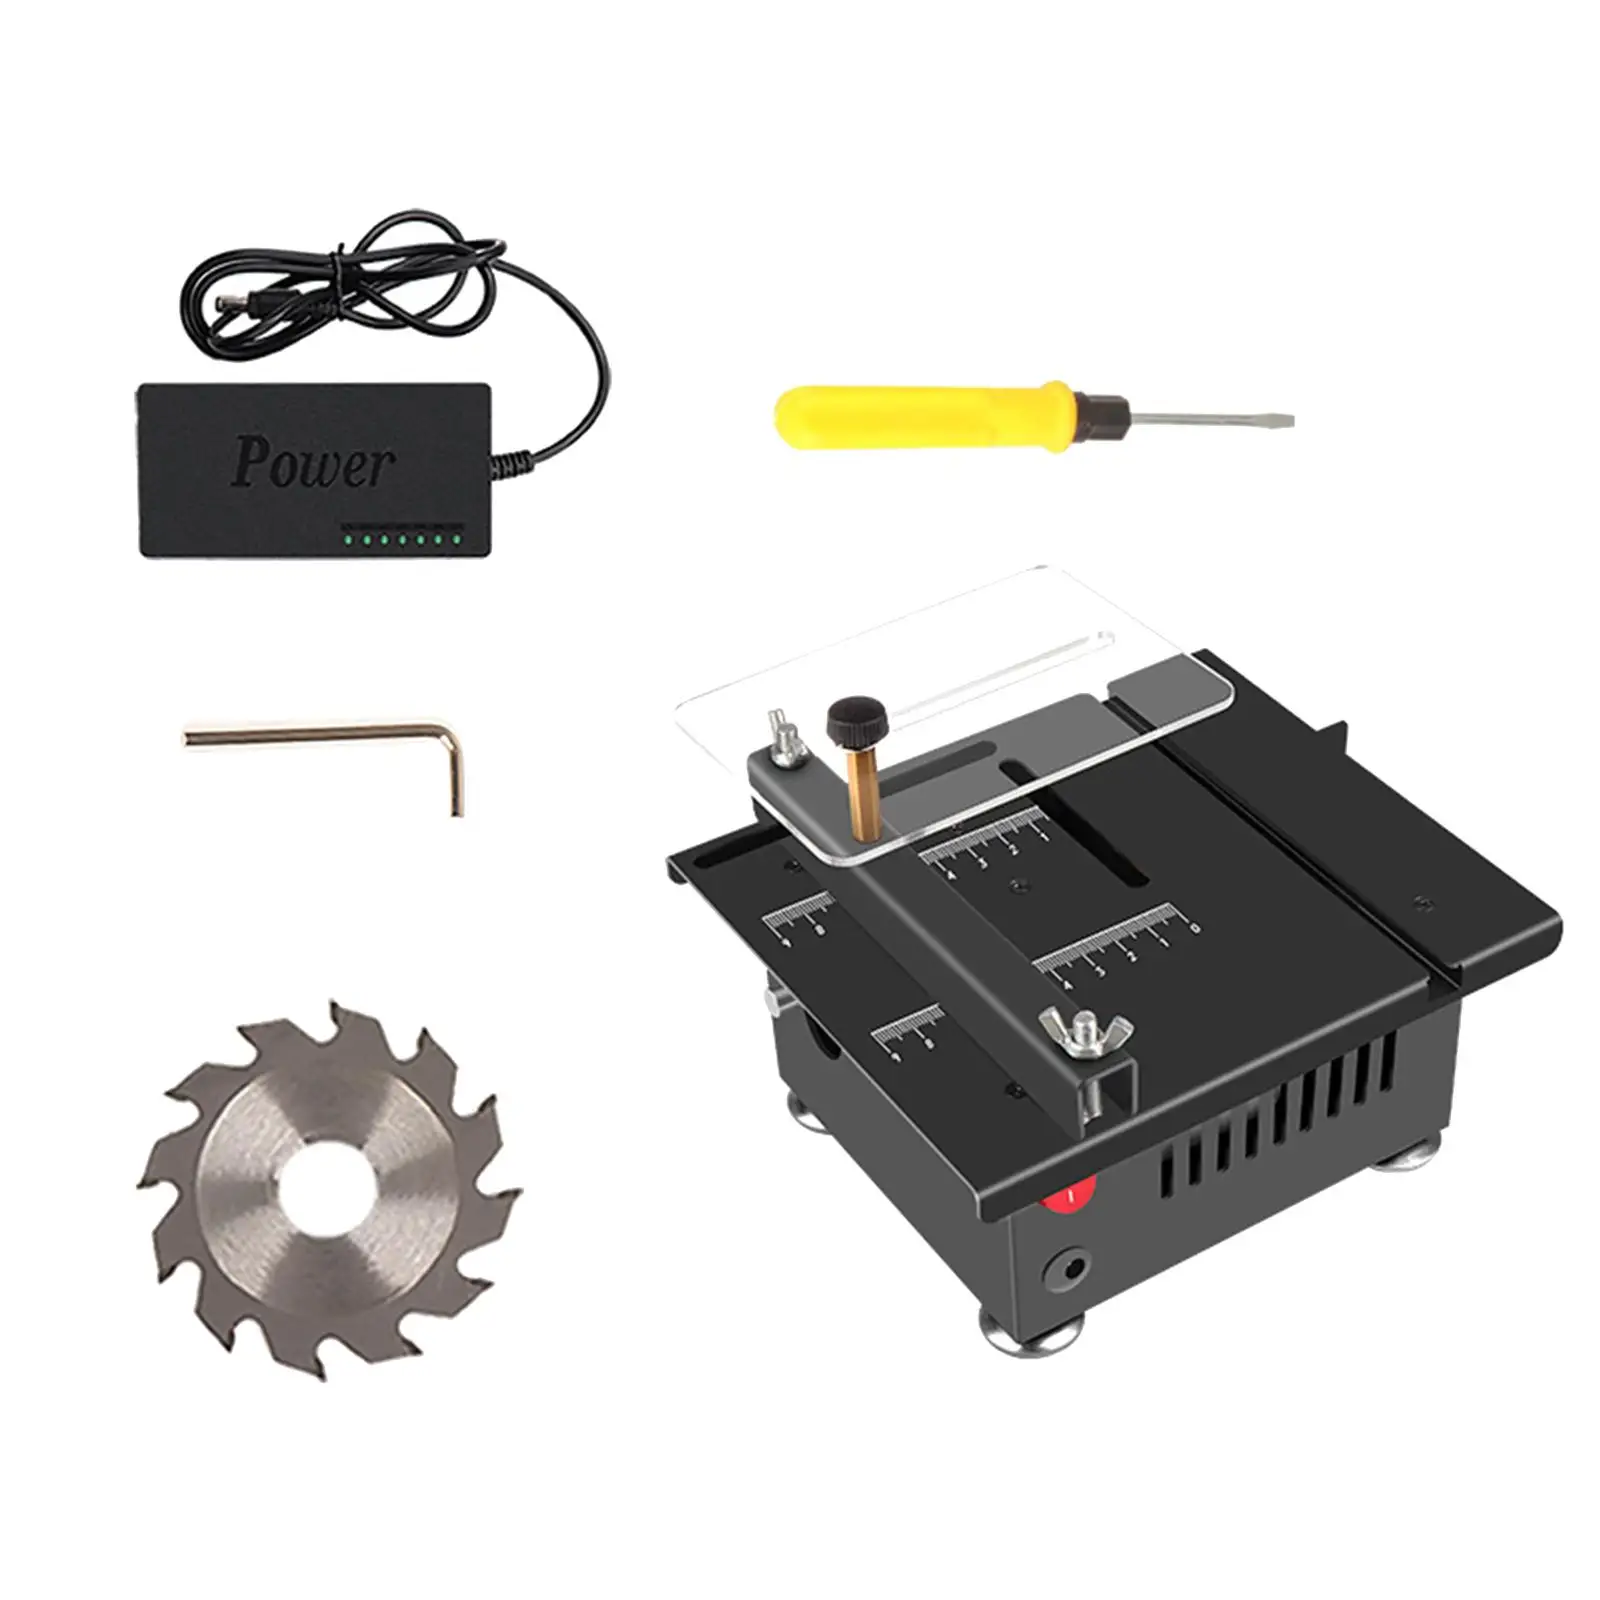 Mini Table Saw Portable Tabletop Saw for Wood Cutting DIY Crafts Wooden Craft Workshop Small Woodworking Projects US Adapter